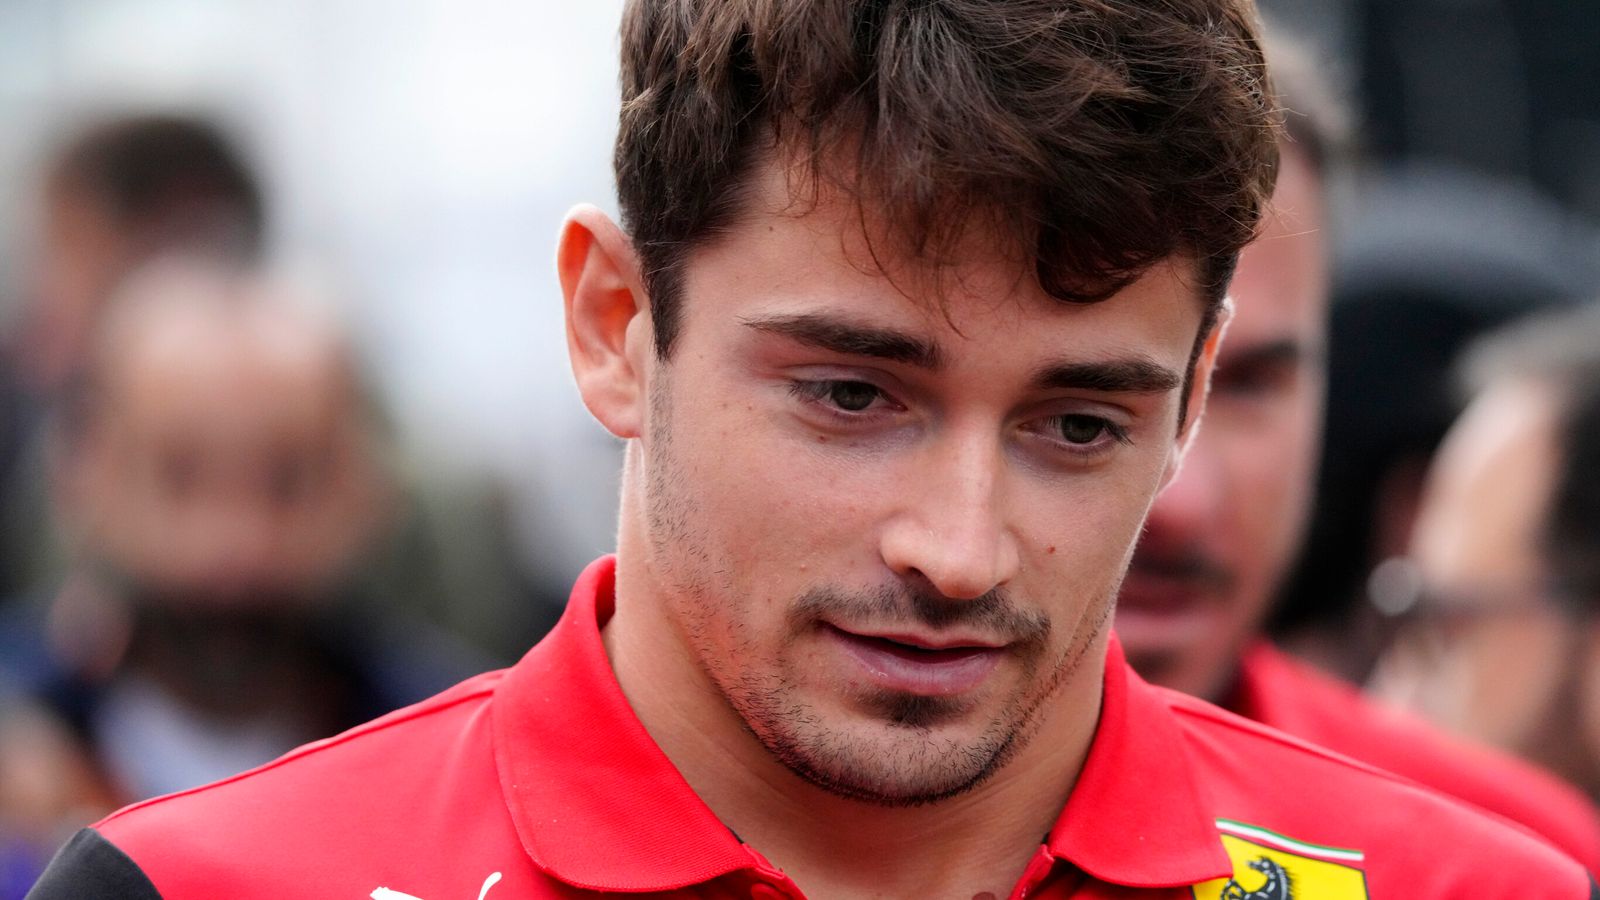 mexico-city-gp-charles-leclerc-hurt-by-performance-as-paul-di-resta-outlines-fears-for-ferrari